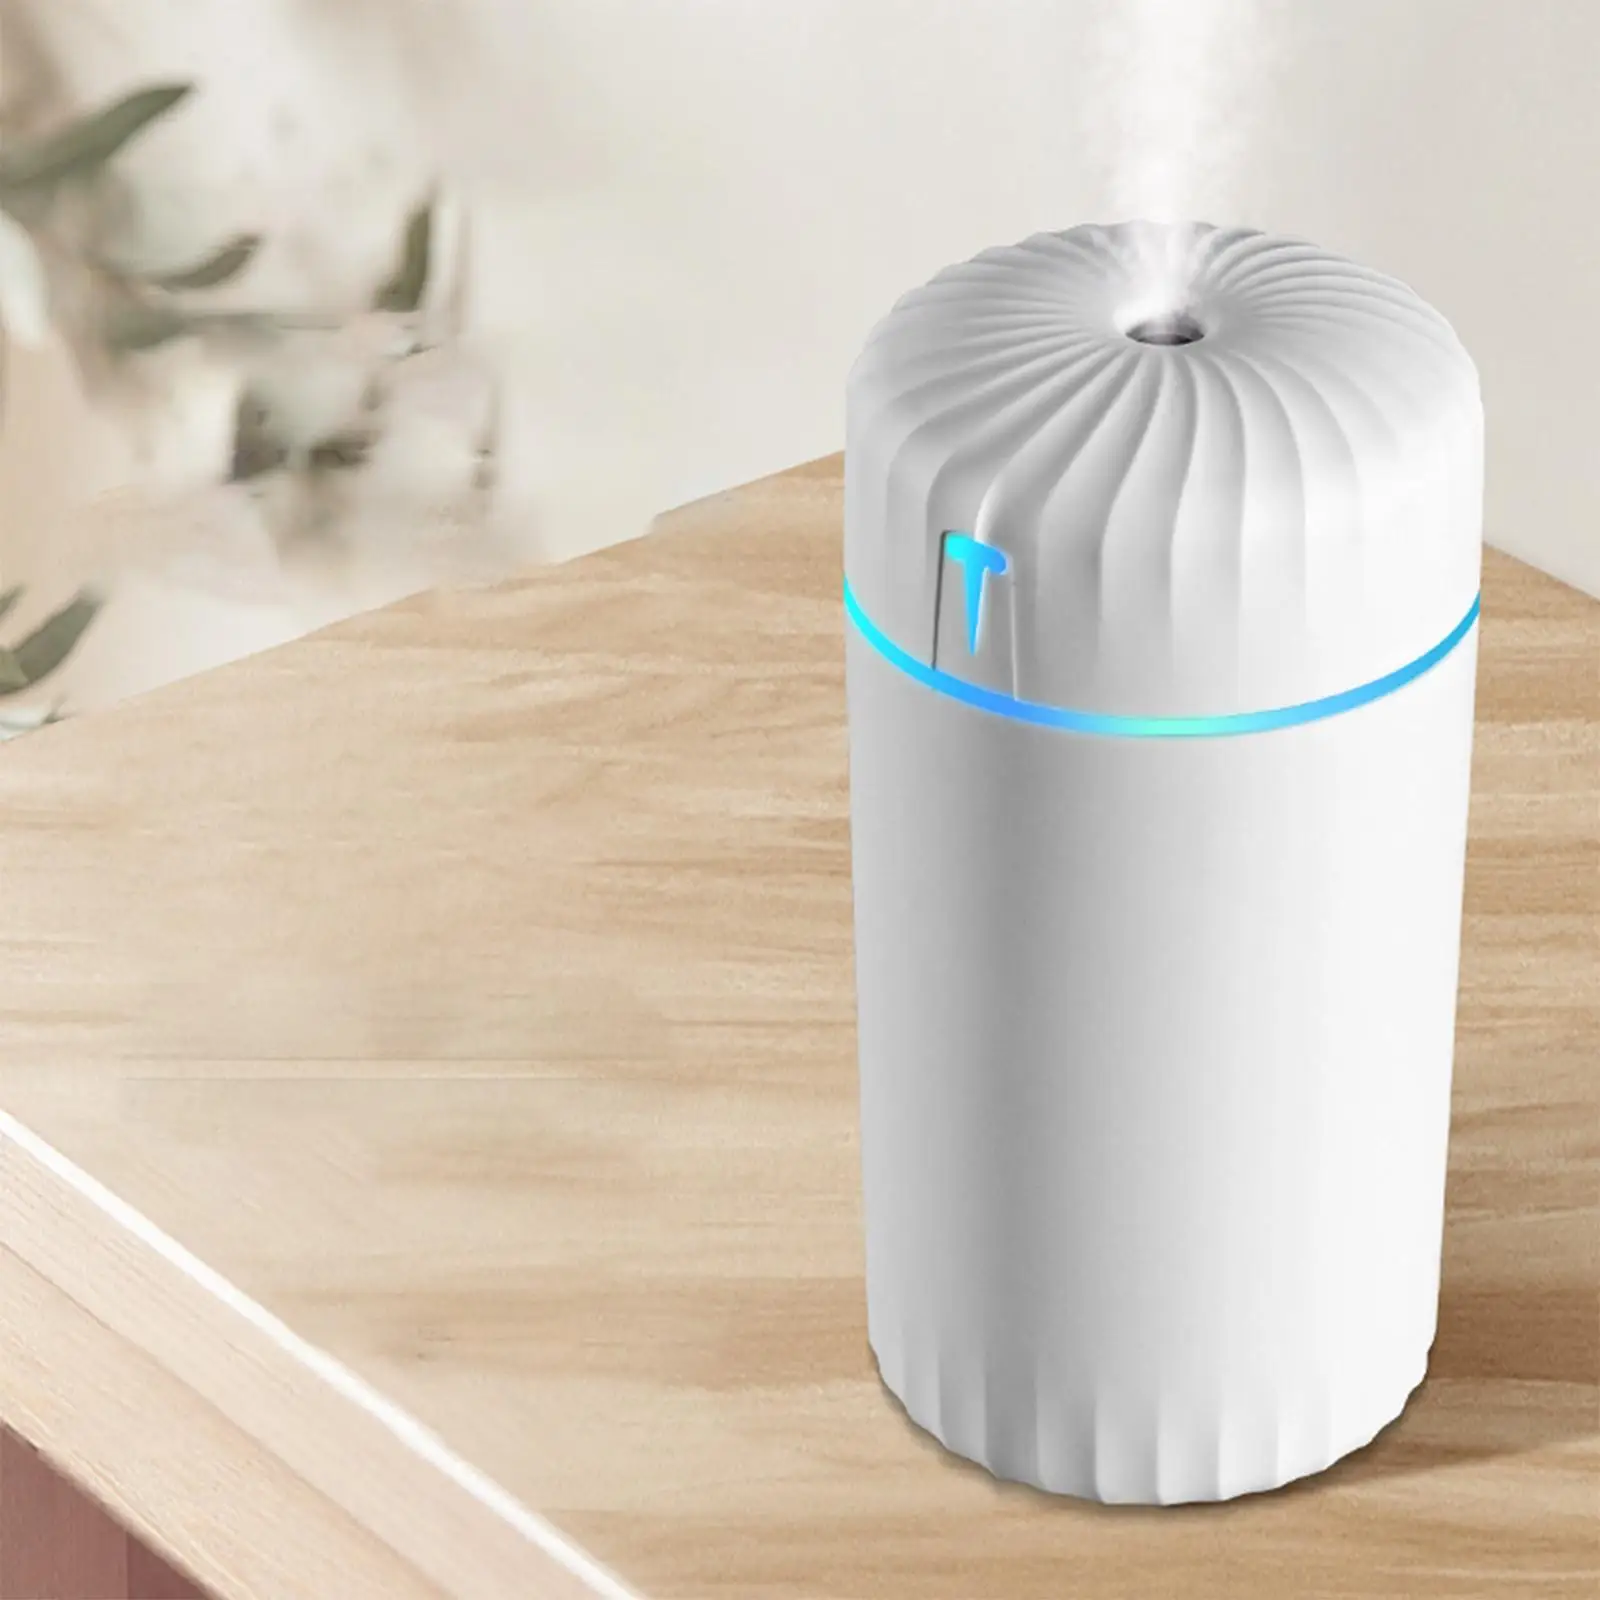 Mini Cool Mist Humidifier Diffuser Purifier USB LED for Travel Home